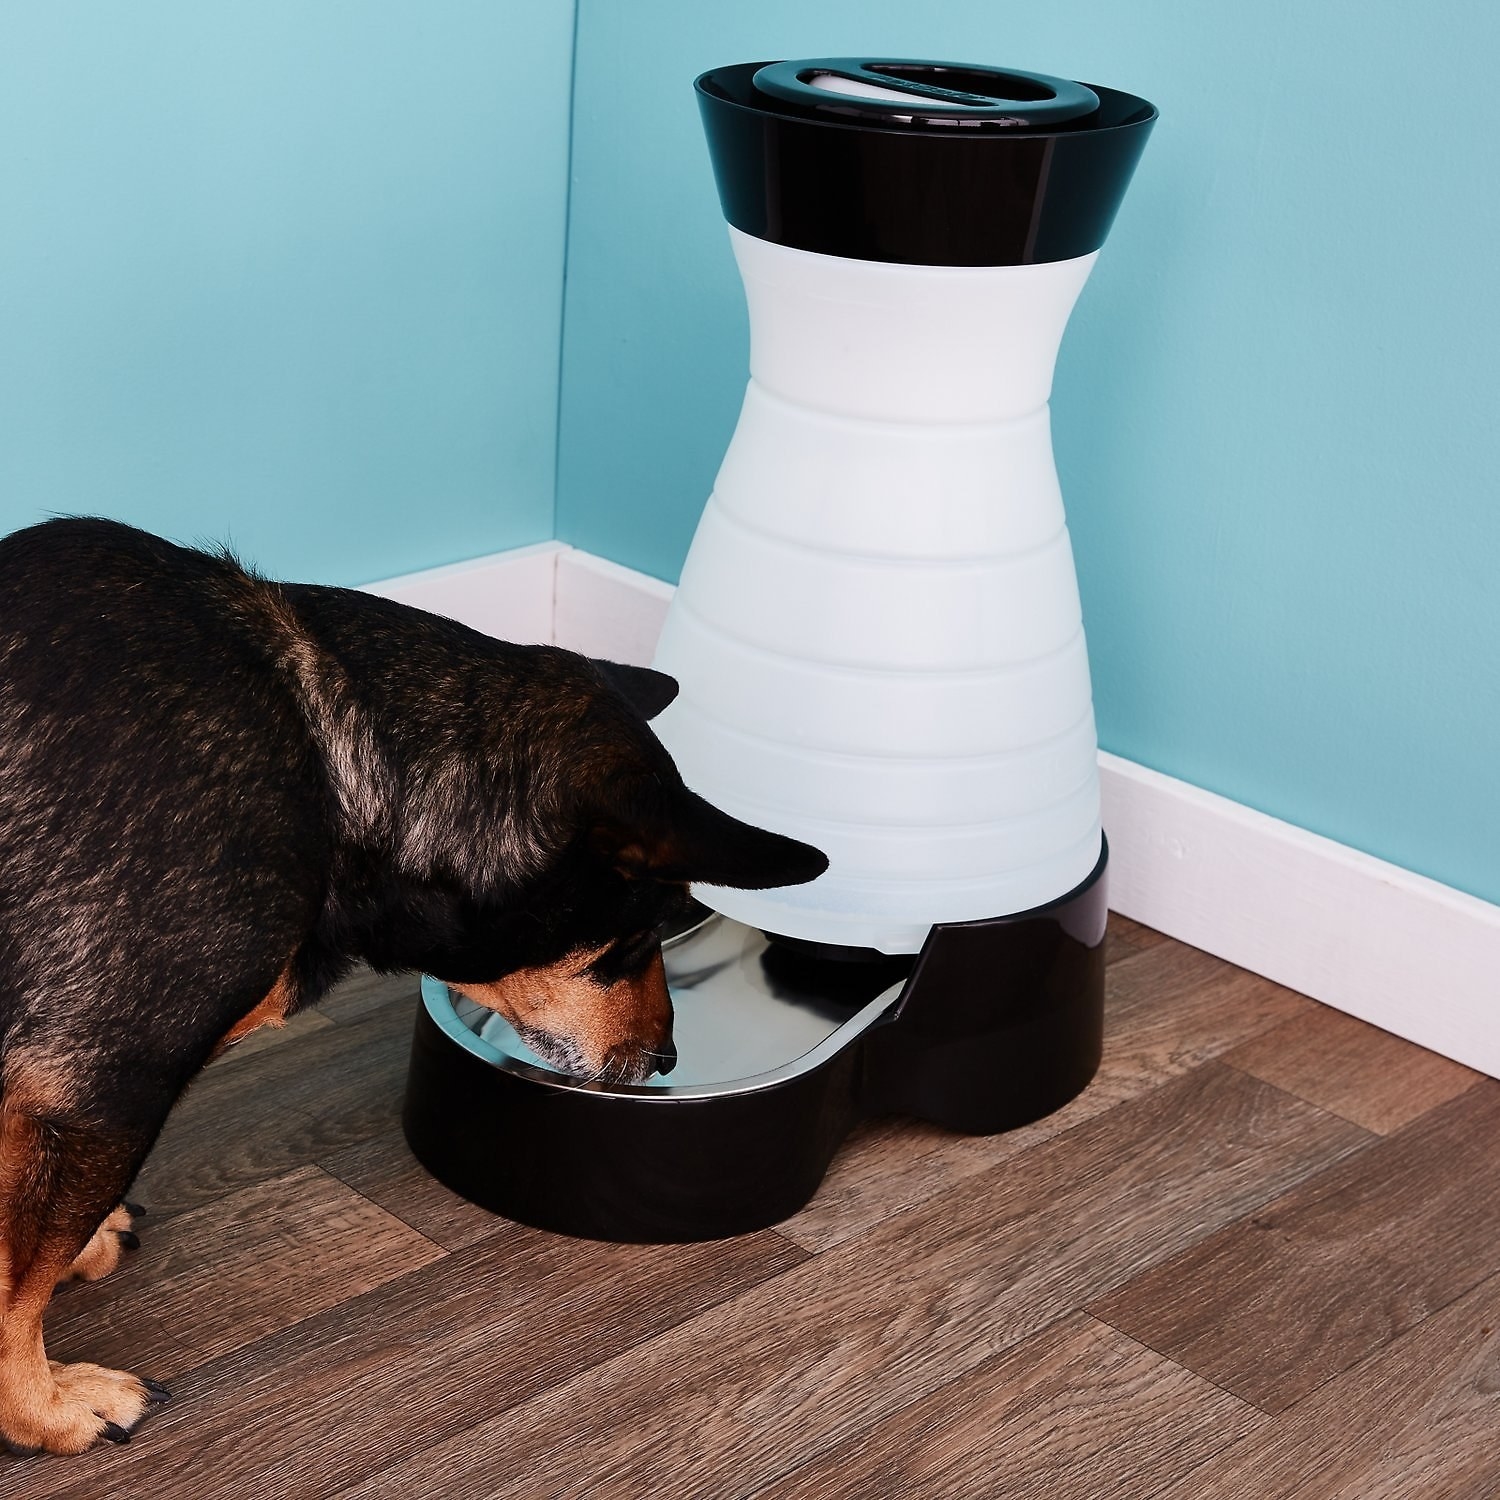 A dog drinking from the water dispenser